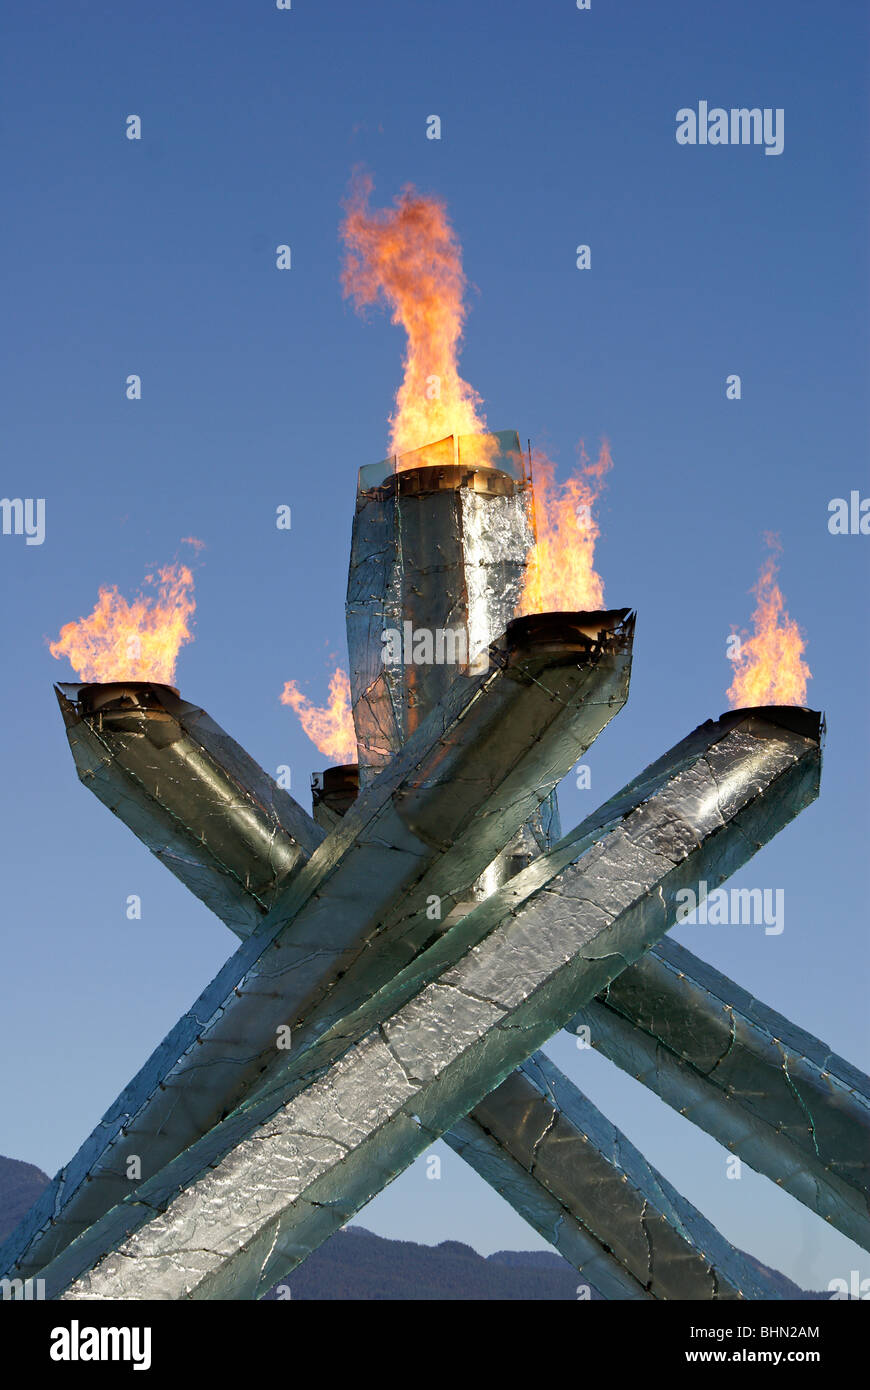 The Olympic Cauldron at the 2010 Winter Games in Vancouver, British Columbia, Canada Stock Photo